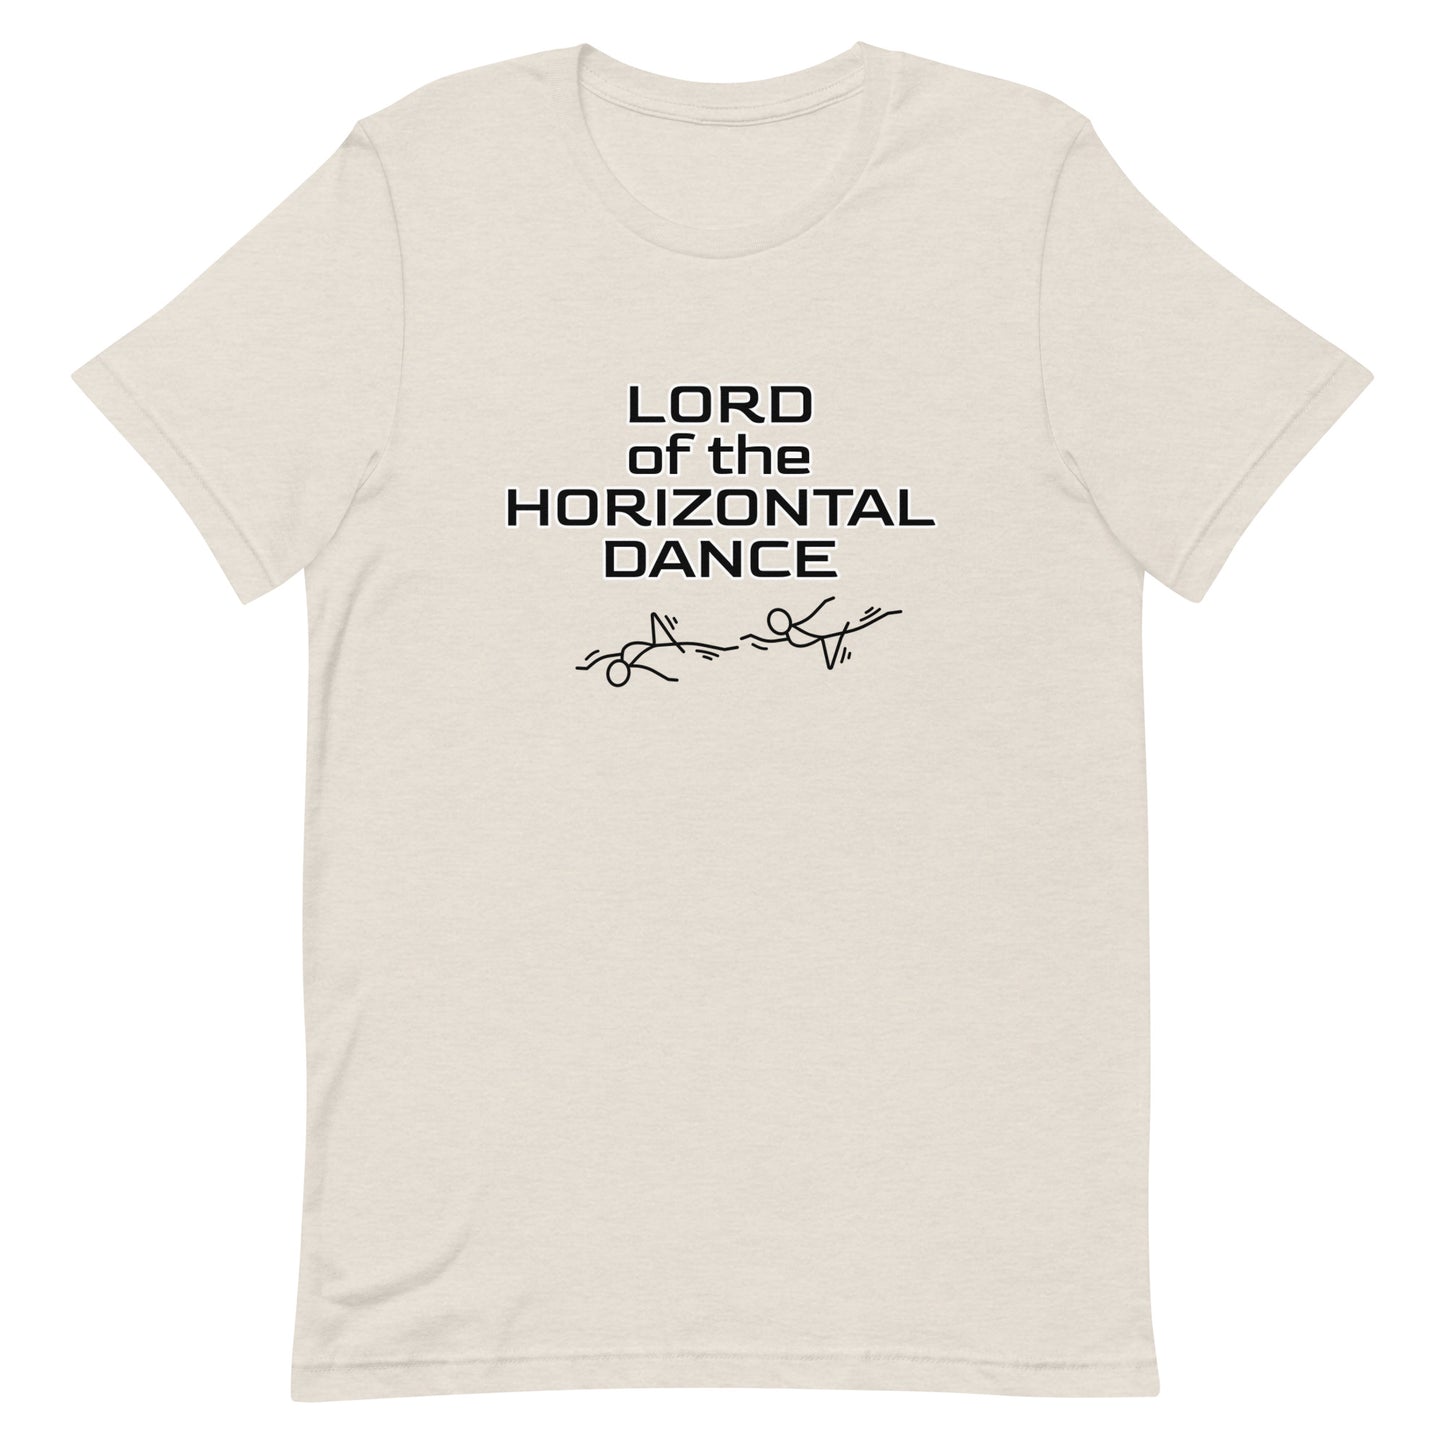 Lord of the horizontal dance